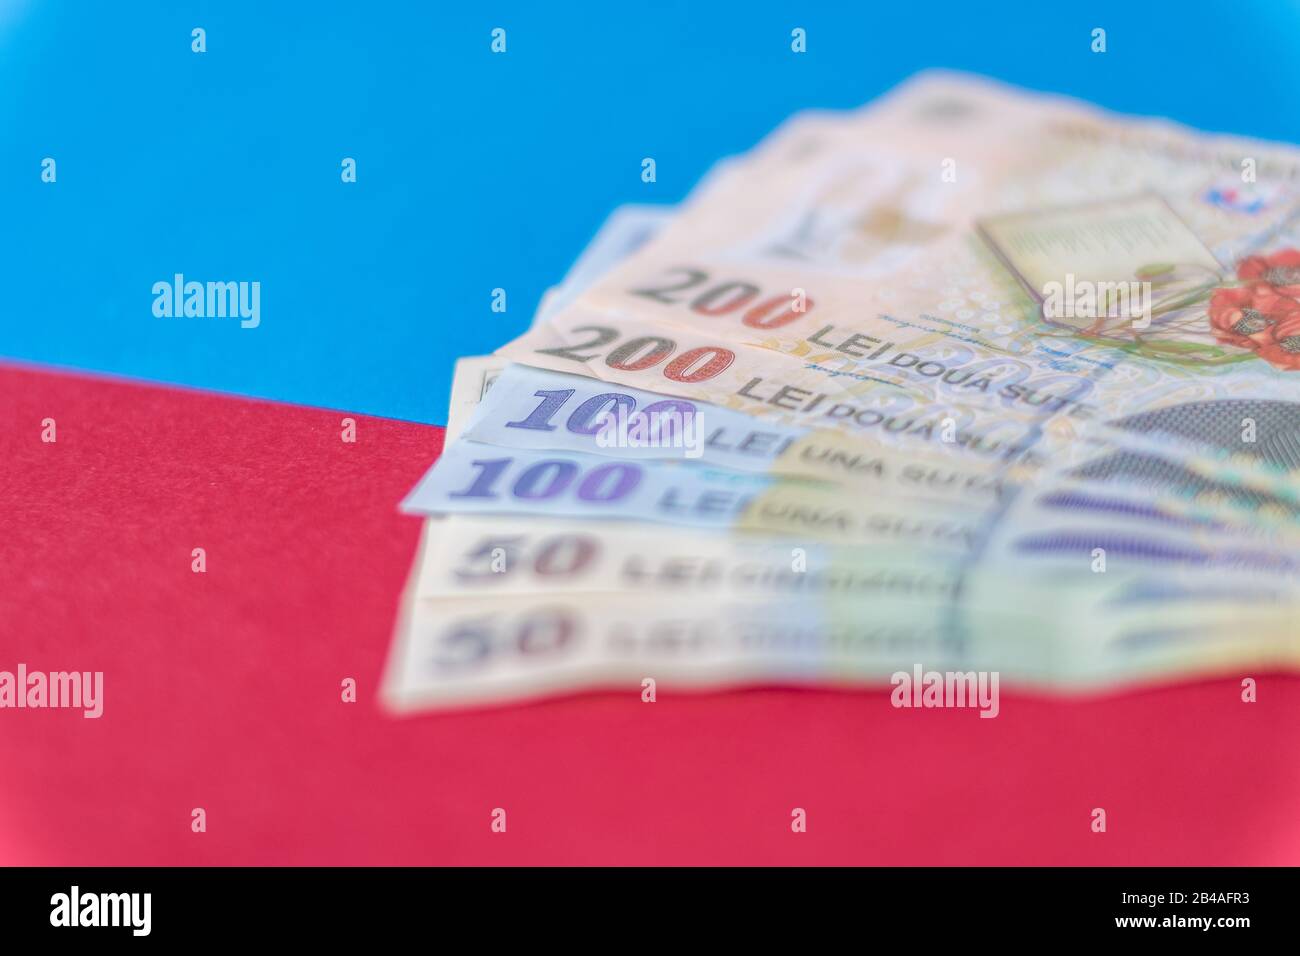 Romanian banknotes on a blue and red background. Coloseup of RON, Romanian Currency. Romanian RON, Lei Banknotes issued by BNR, National Bank of Roman Stock Photo